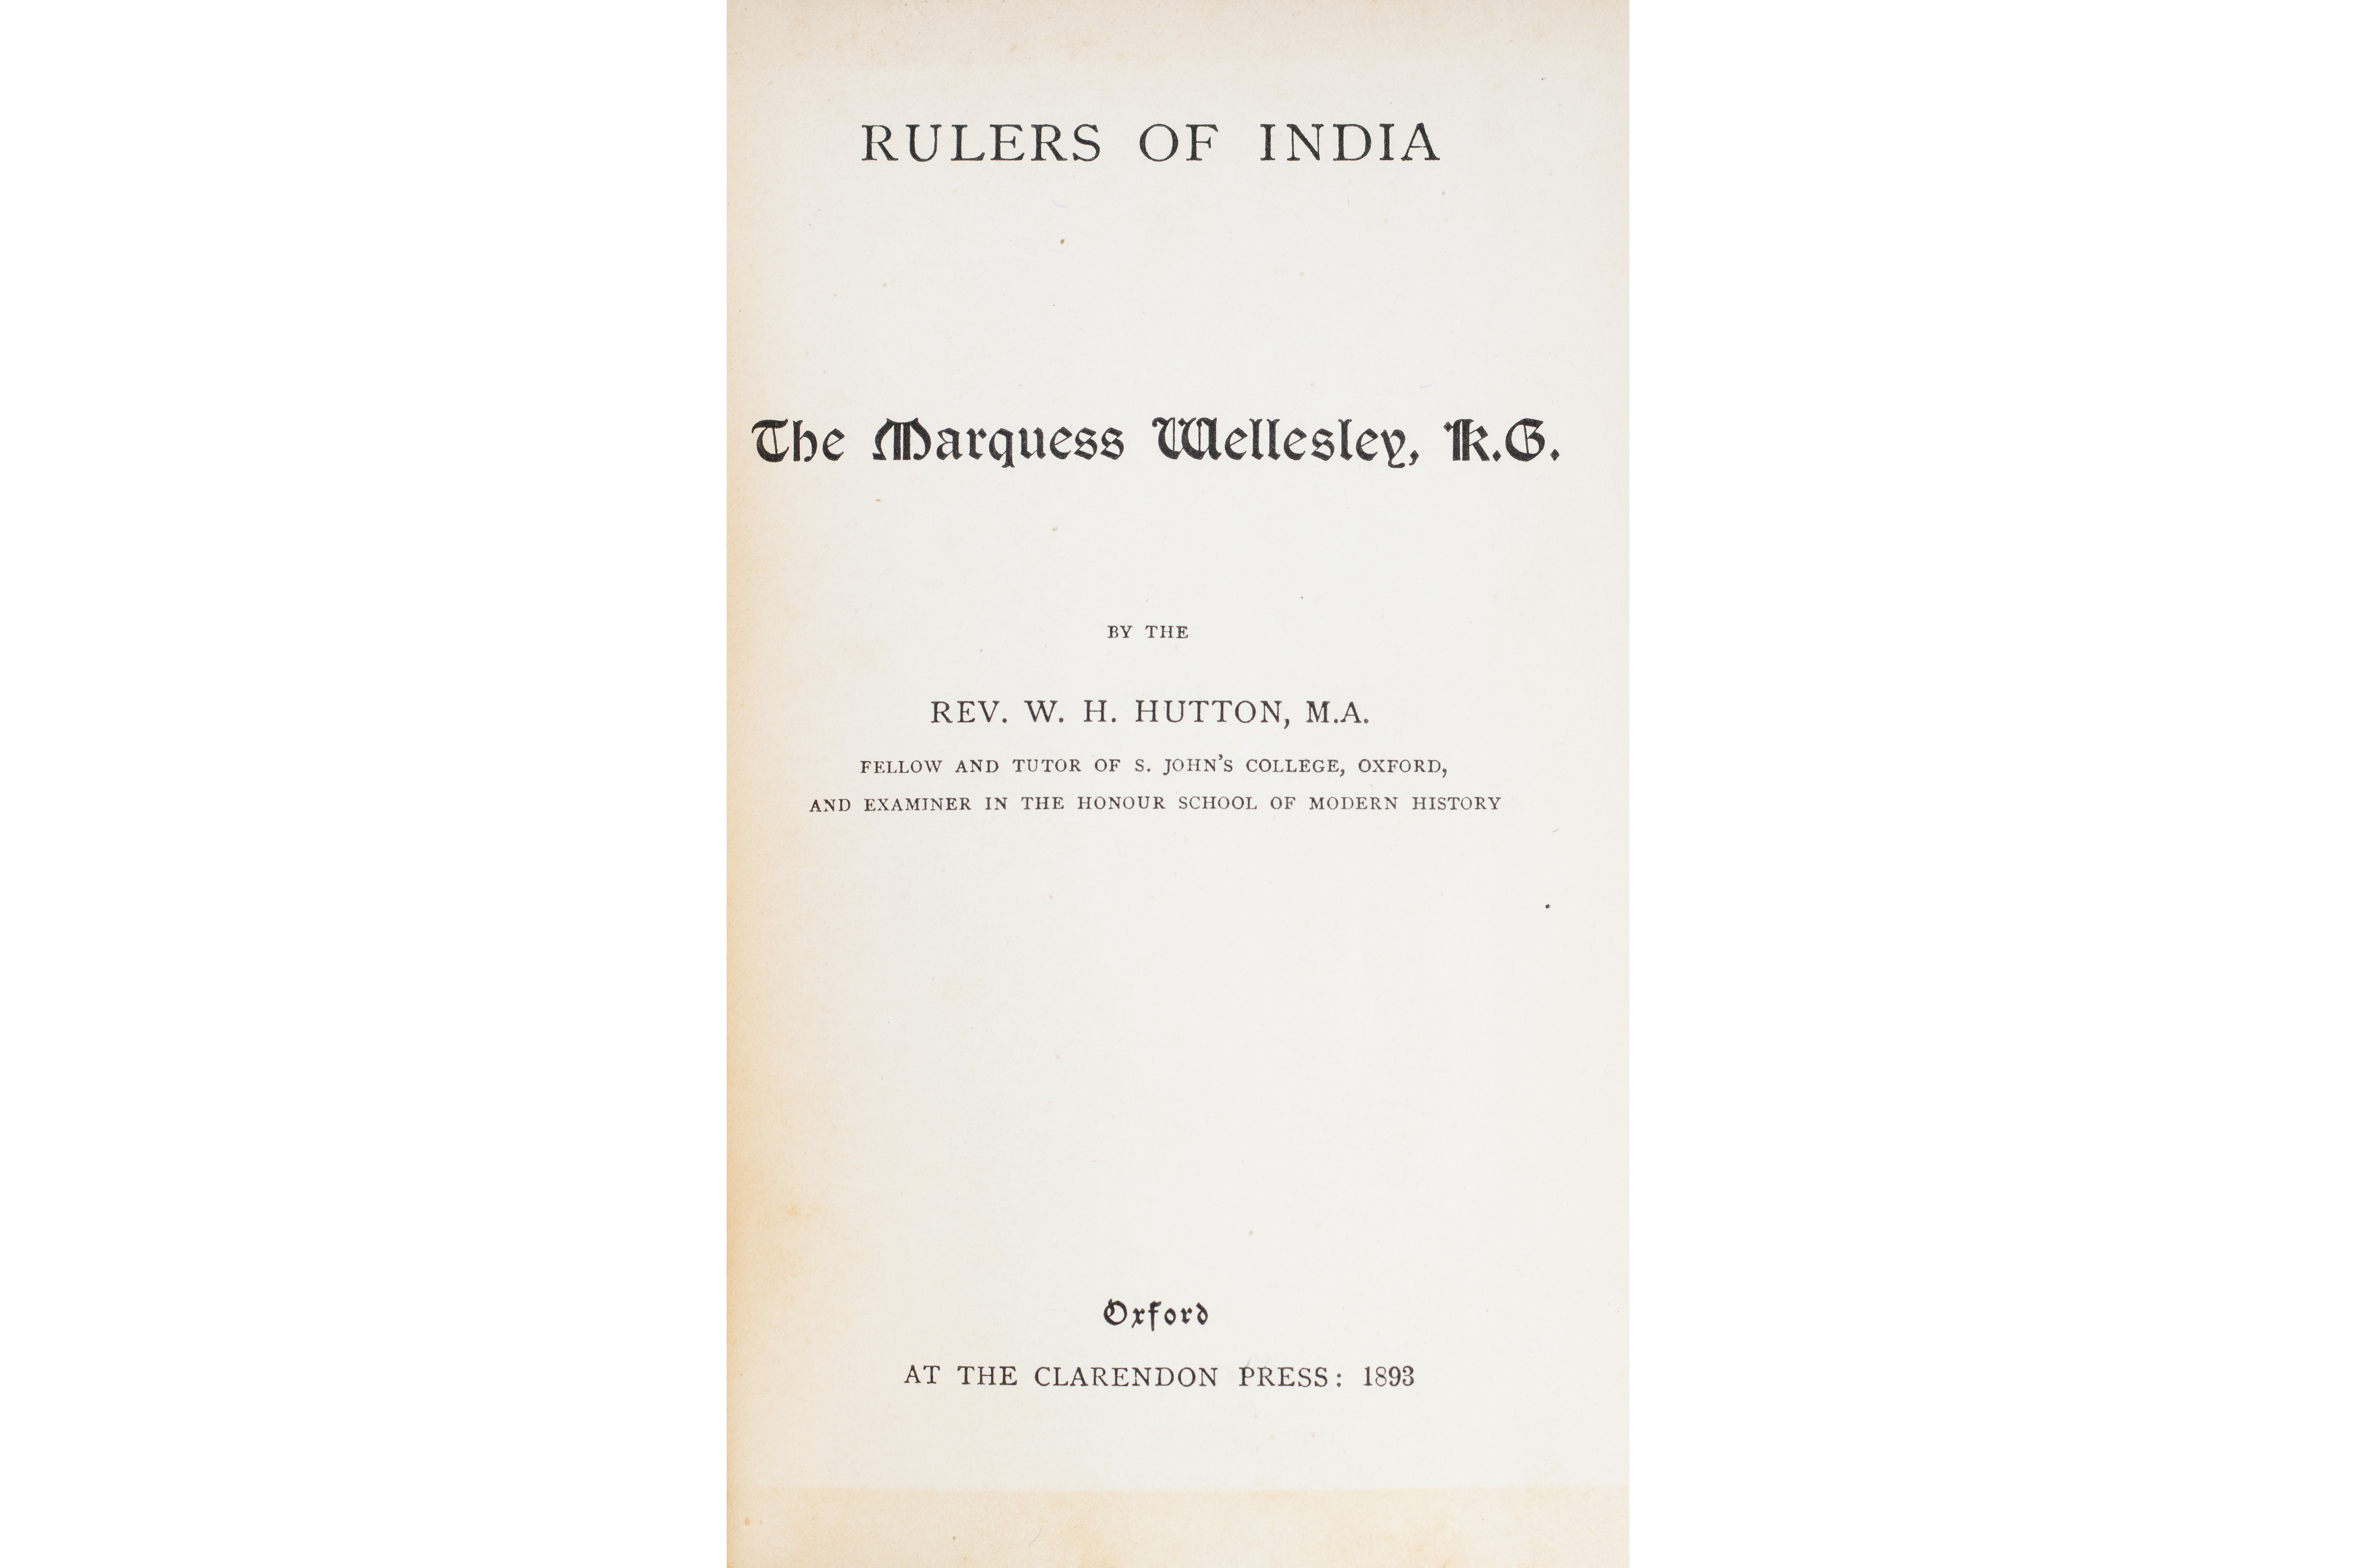 VARIOUS AUTHORS - 'RULERS OF INDIA' - Image 15 of 19